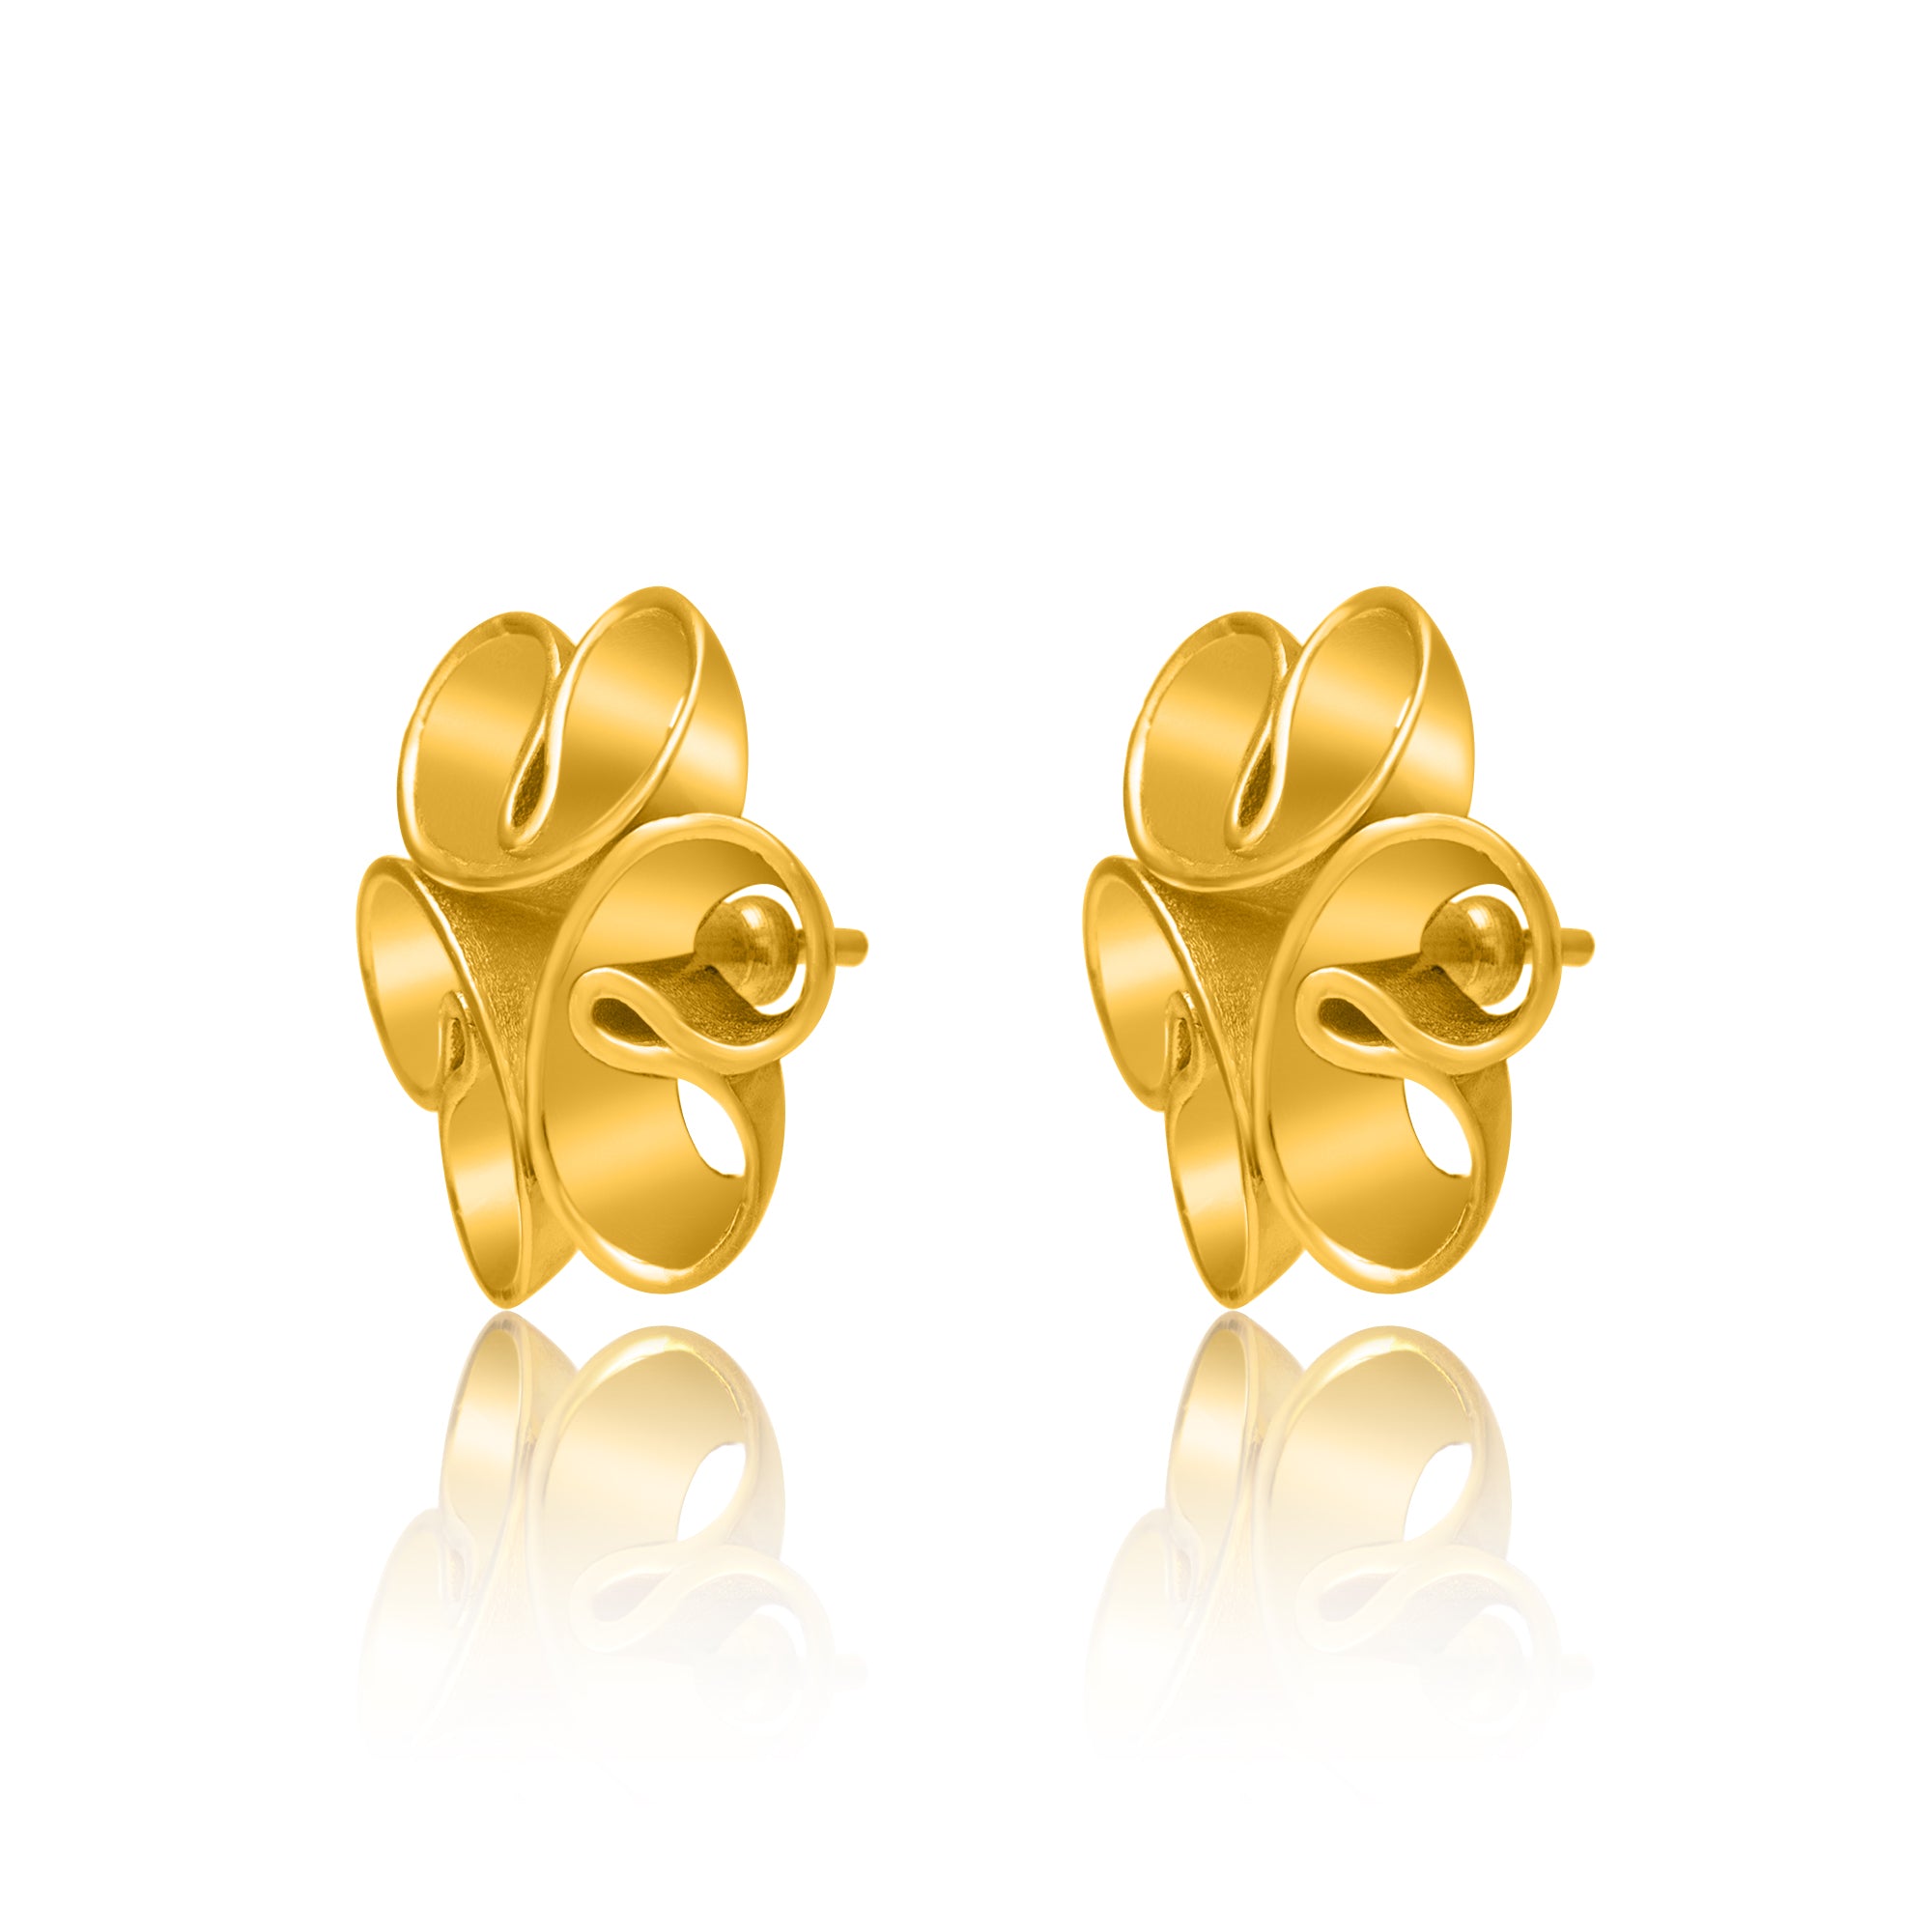 24K Gold Plating Love Blossoms Elysian Collection Earrings